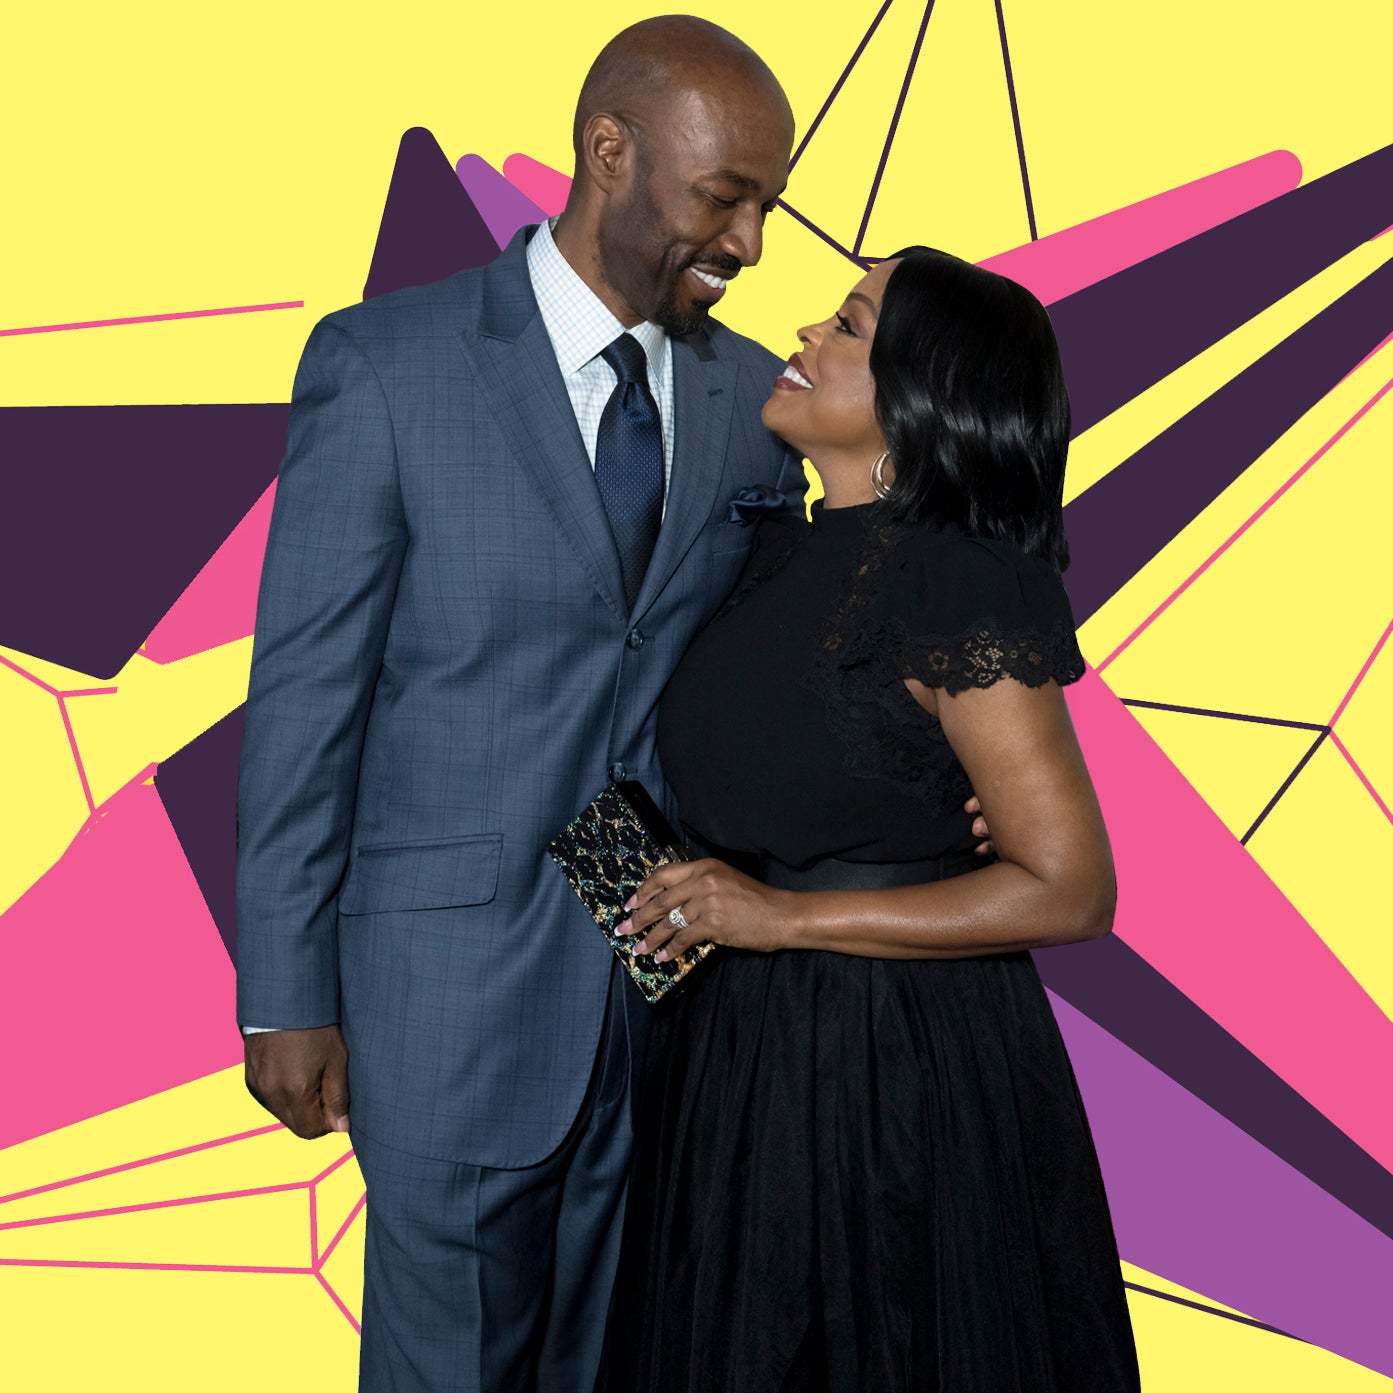 Niecy Nash On Finding Love With A Good Guy: 'My Husband Has Taught Me What Consistency Looks Like'
